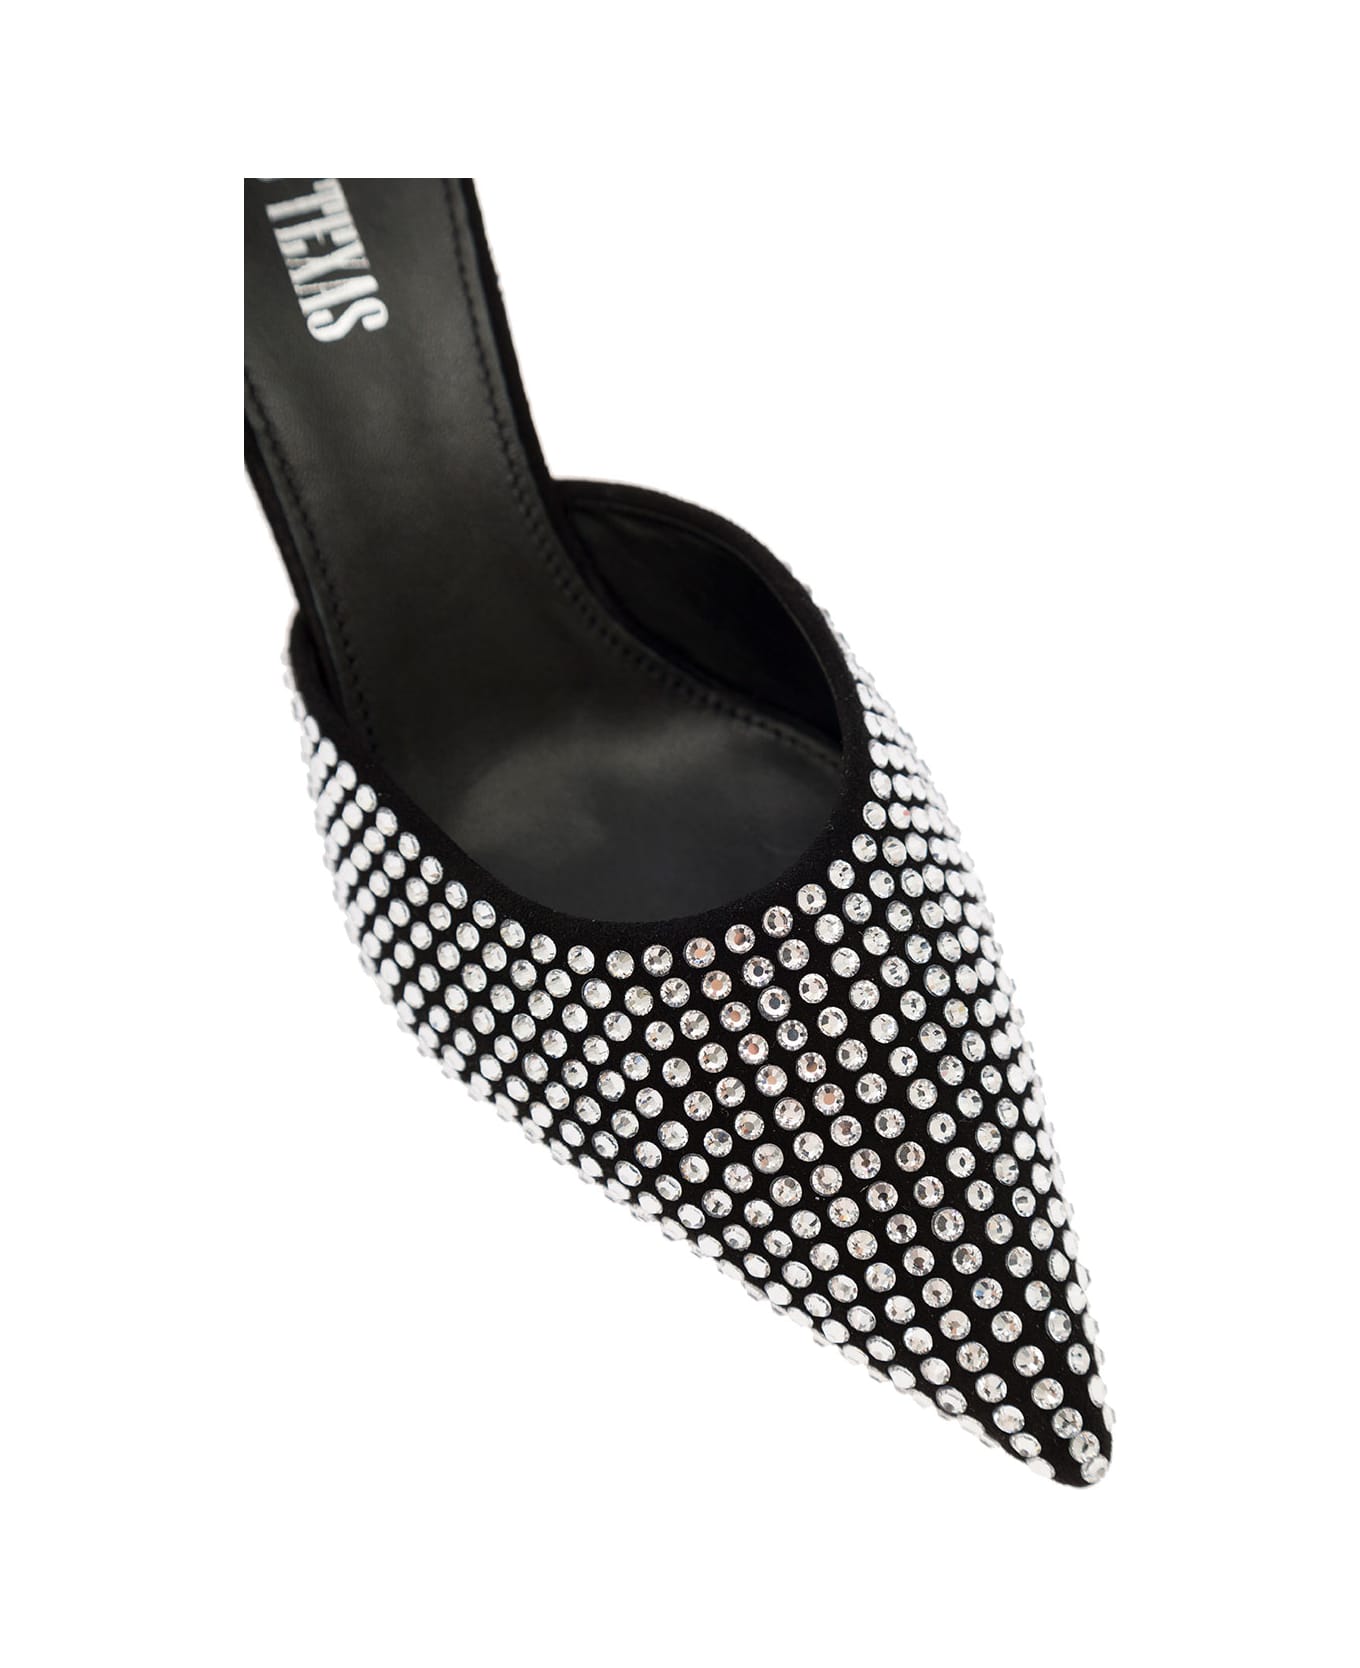 Paris Texas 'hollywood' Black Pointed Mules With Rhinestone Embellishment In Leather Woman - Black